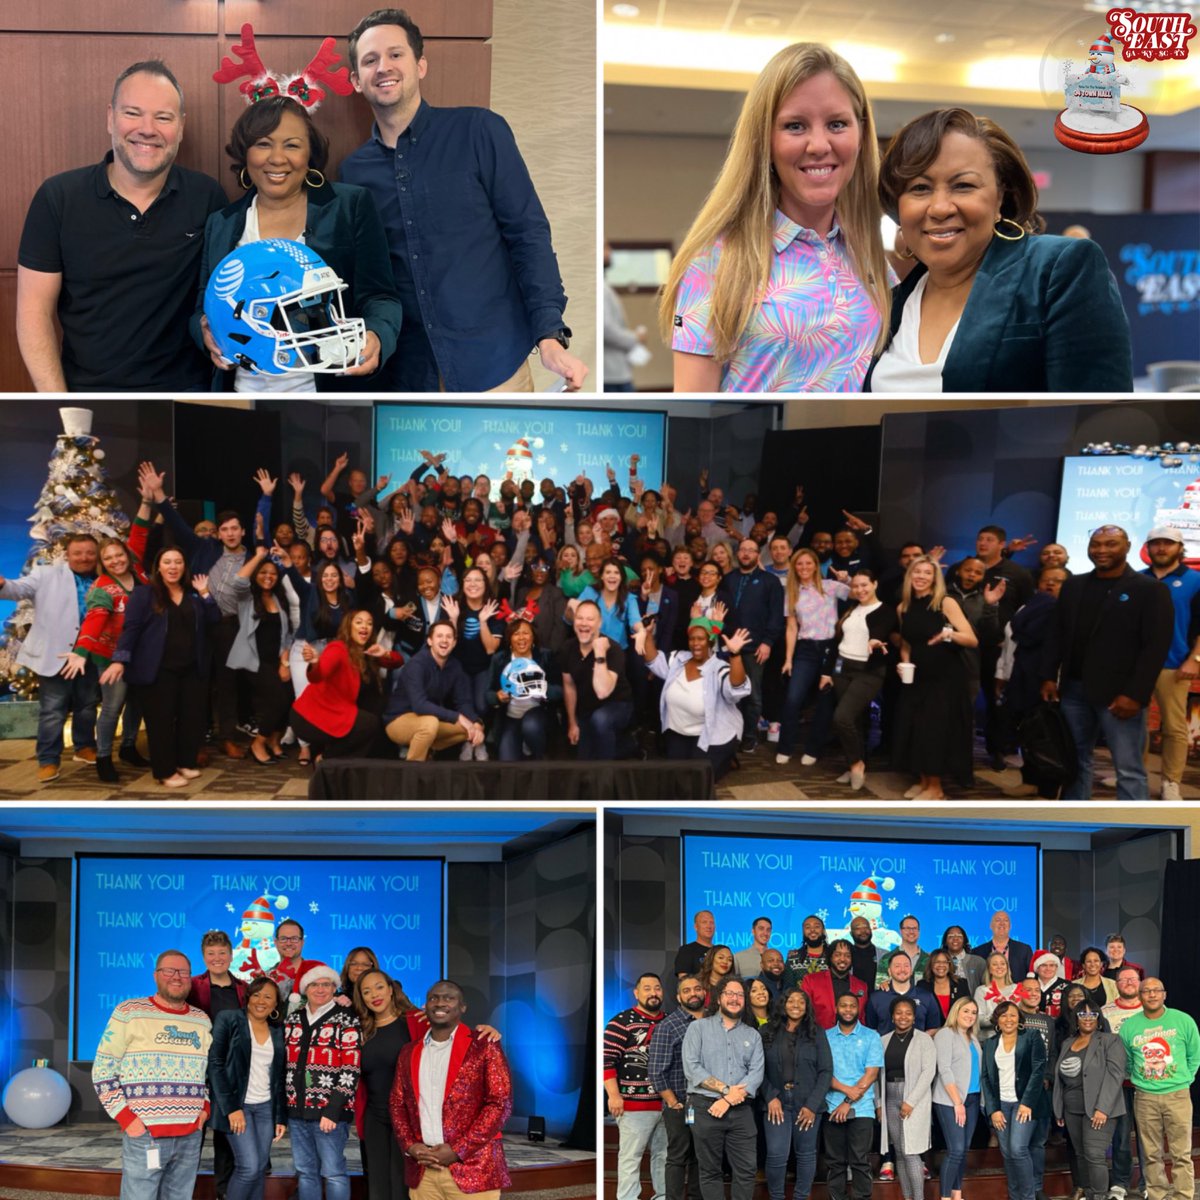 That's a wrap on our #SES Q4 Town Hall🎉, & oh, what a blast it was! A HUGE shoutout to our incredible team, partners, & our Advertising fam for showcasing the #5G helmet! We're all set to crush Q4 & amplify our purpose! Who are we?… #SouthBEAST #WorkHard #PlayHard #LifeAtAtt